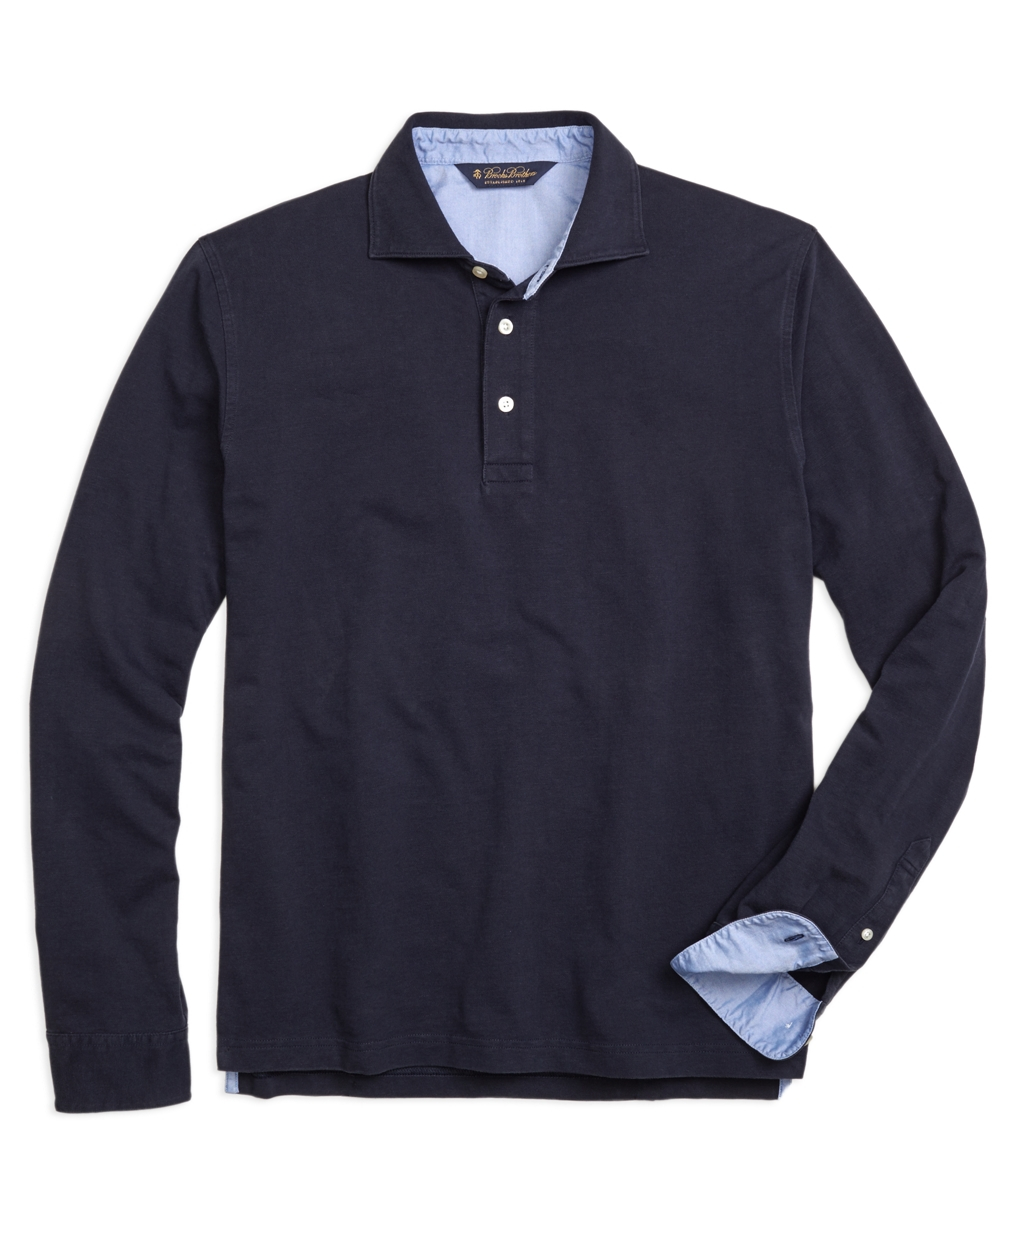 Lyst - Brooks Brothers Long-sleeve Cotton Linen Polo Shirt in Blue for Men